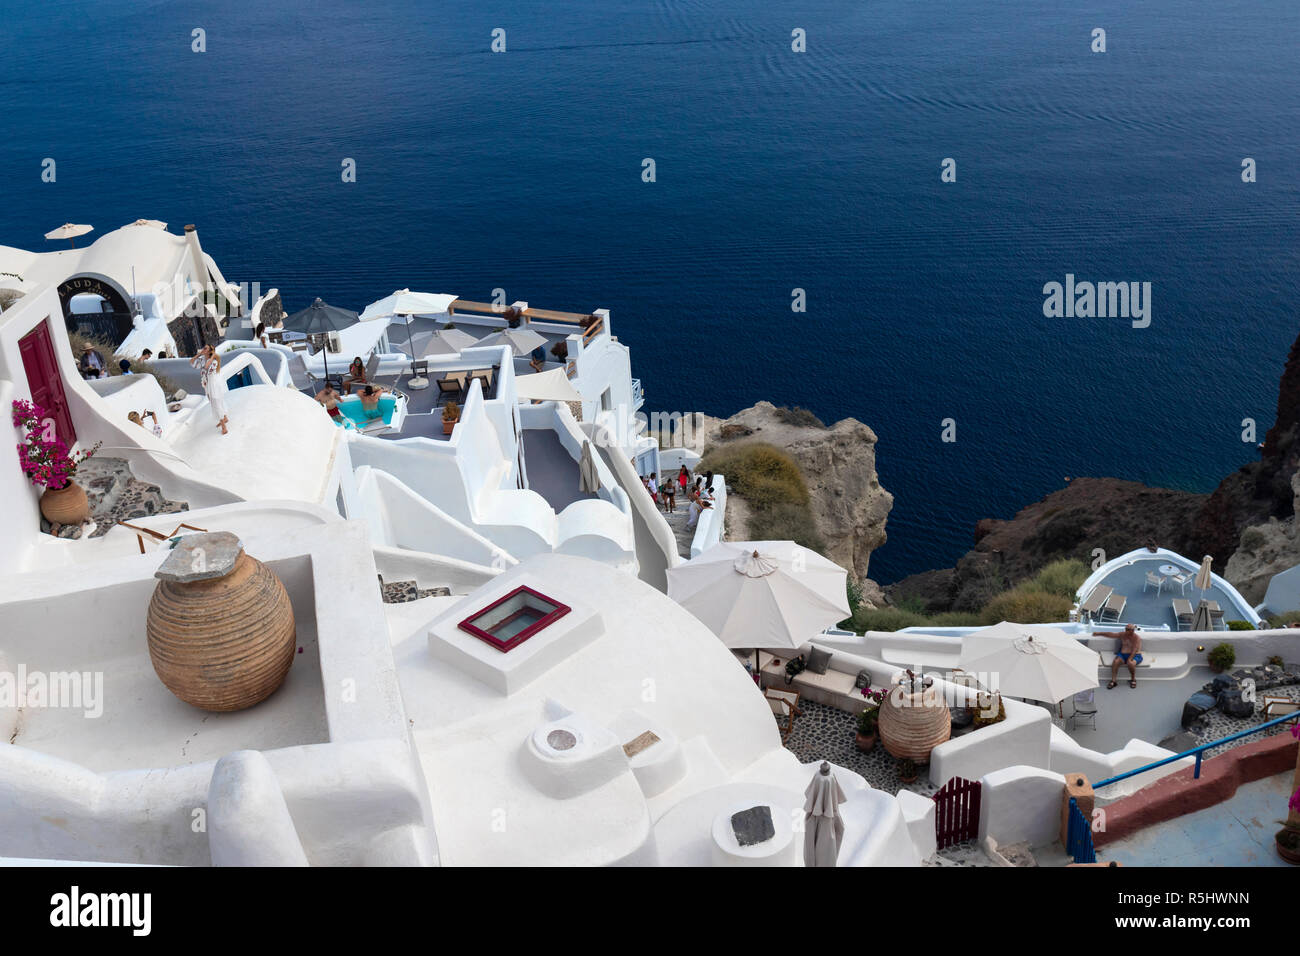 OIA, SANTORINI, GREECE - August 20, 2018: Wealthy tourists enjoy the sunshine at the pools in the exclusive cliff side suites of Oia. Stock Photo